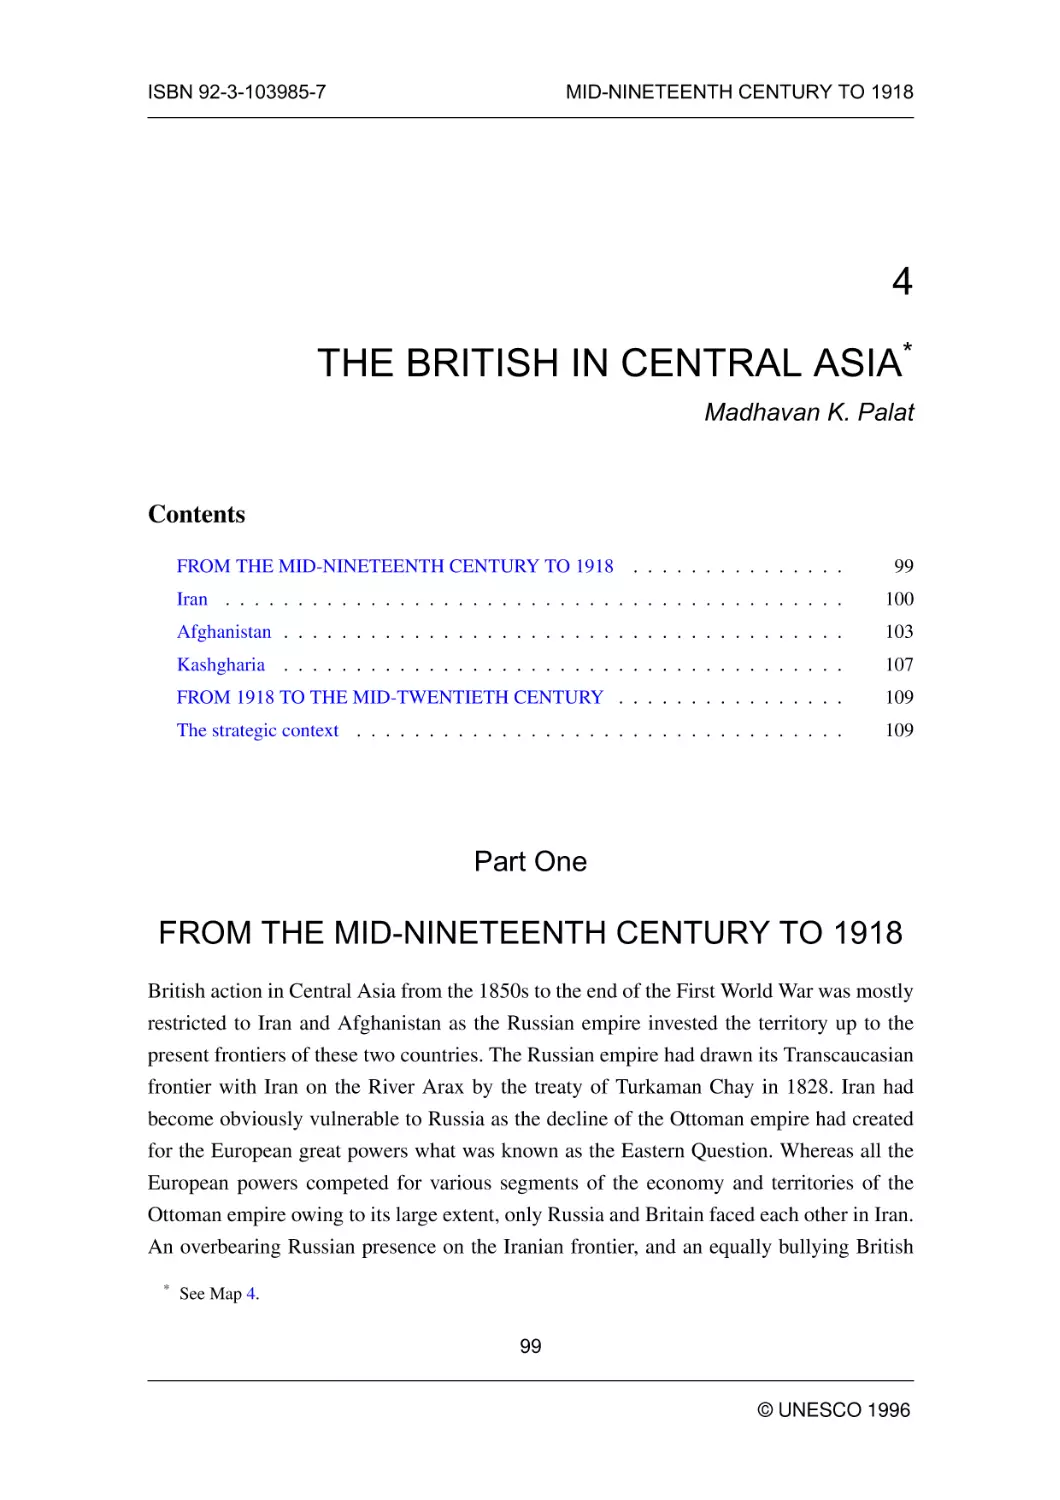 THE BRITISH IN CENTRAL ASIA